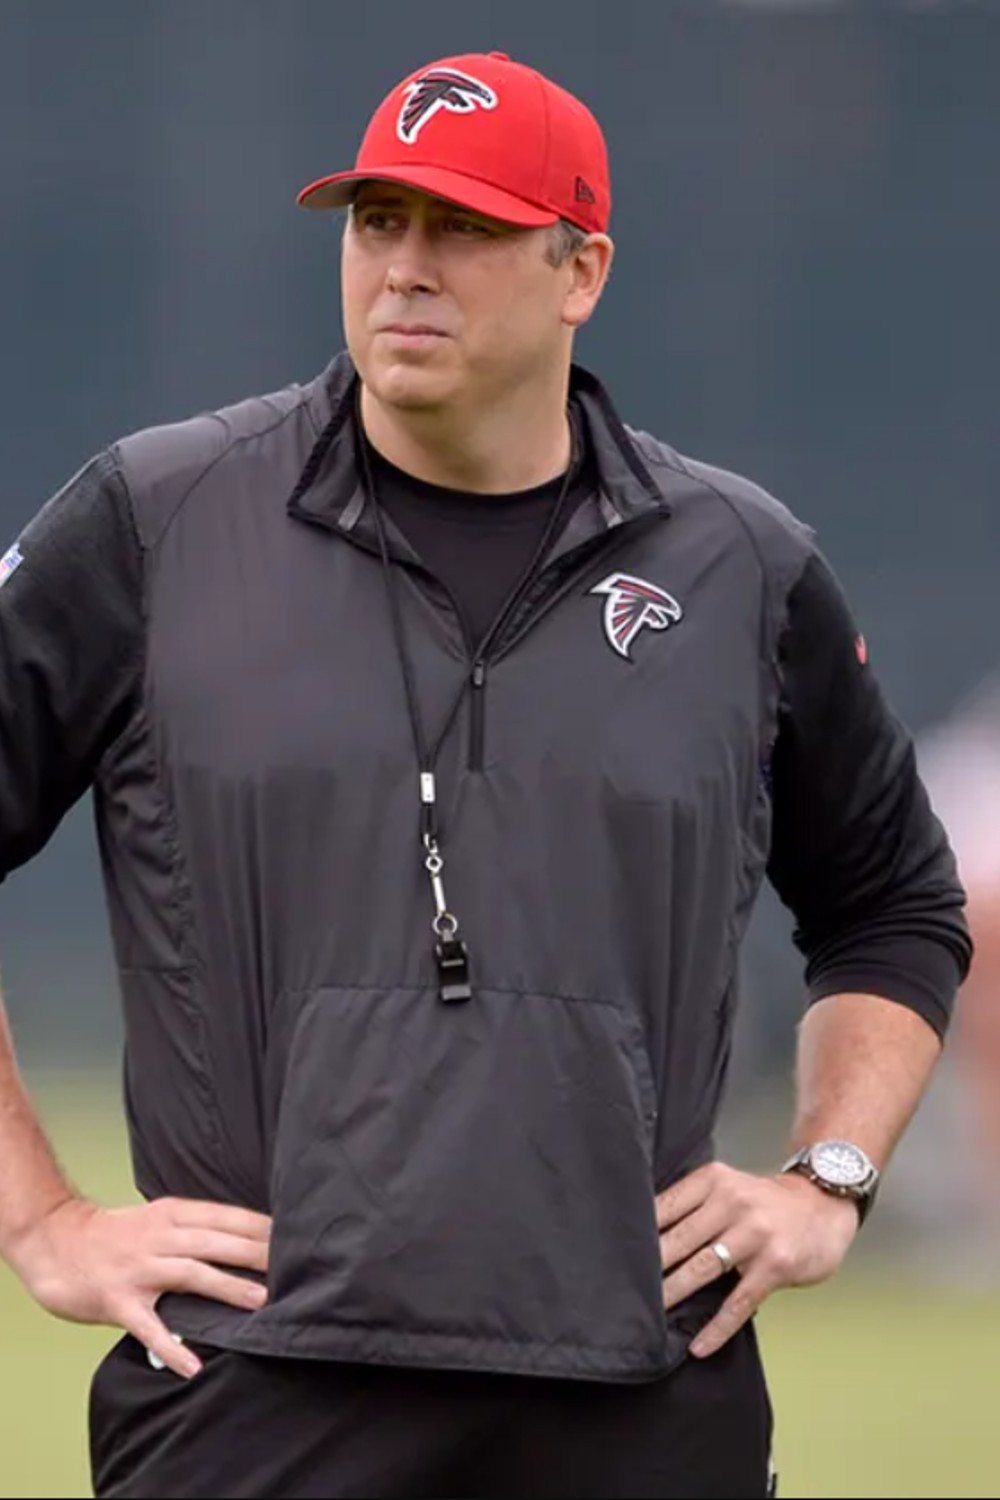 Arthur the Head coach of the Falcons Has been Fired